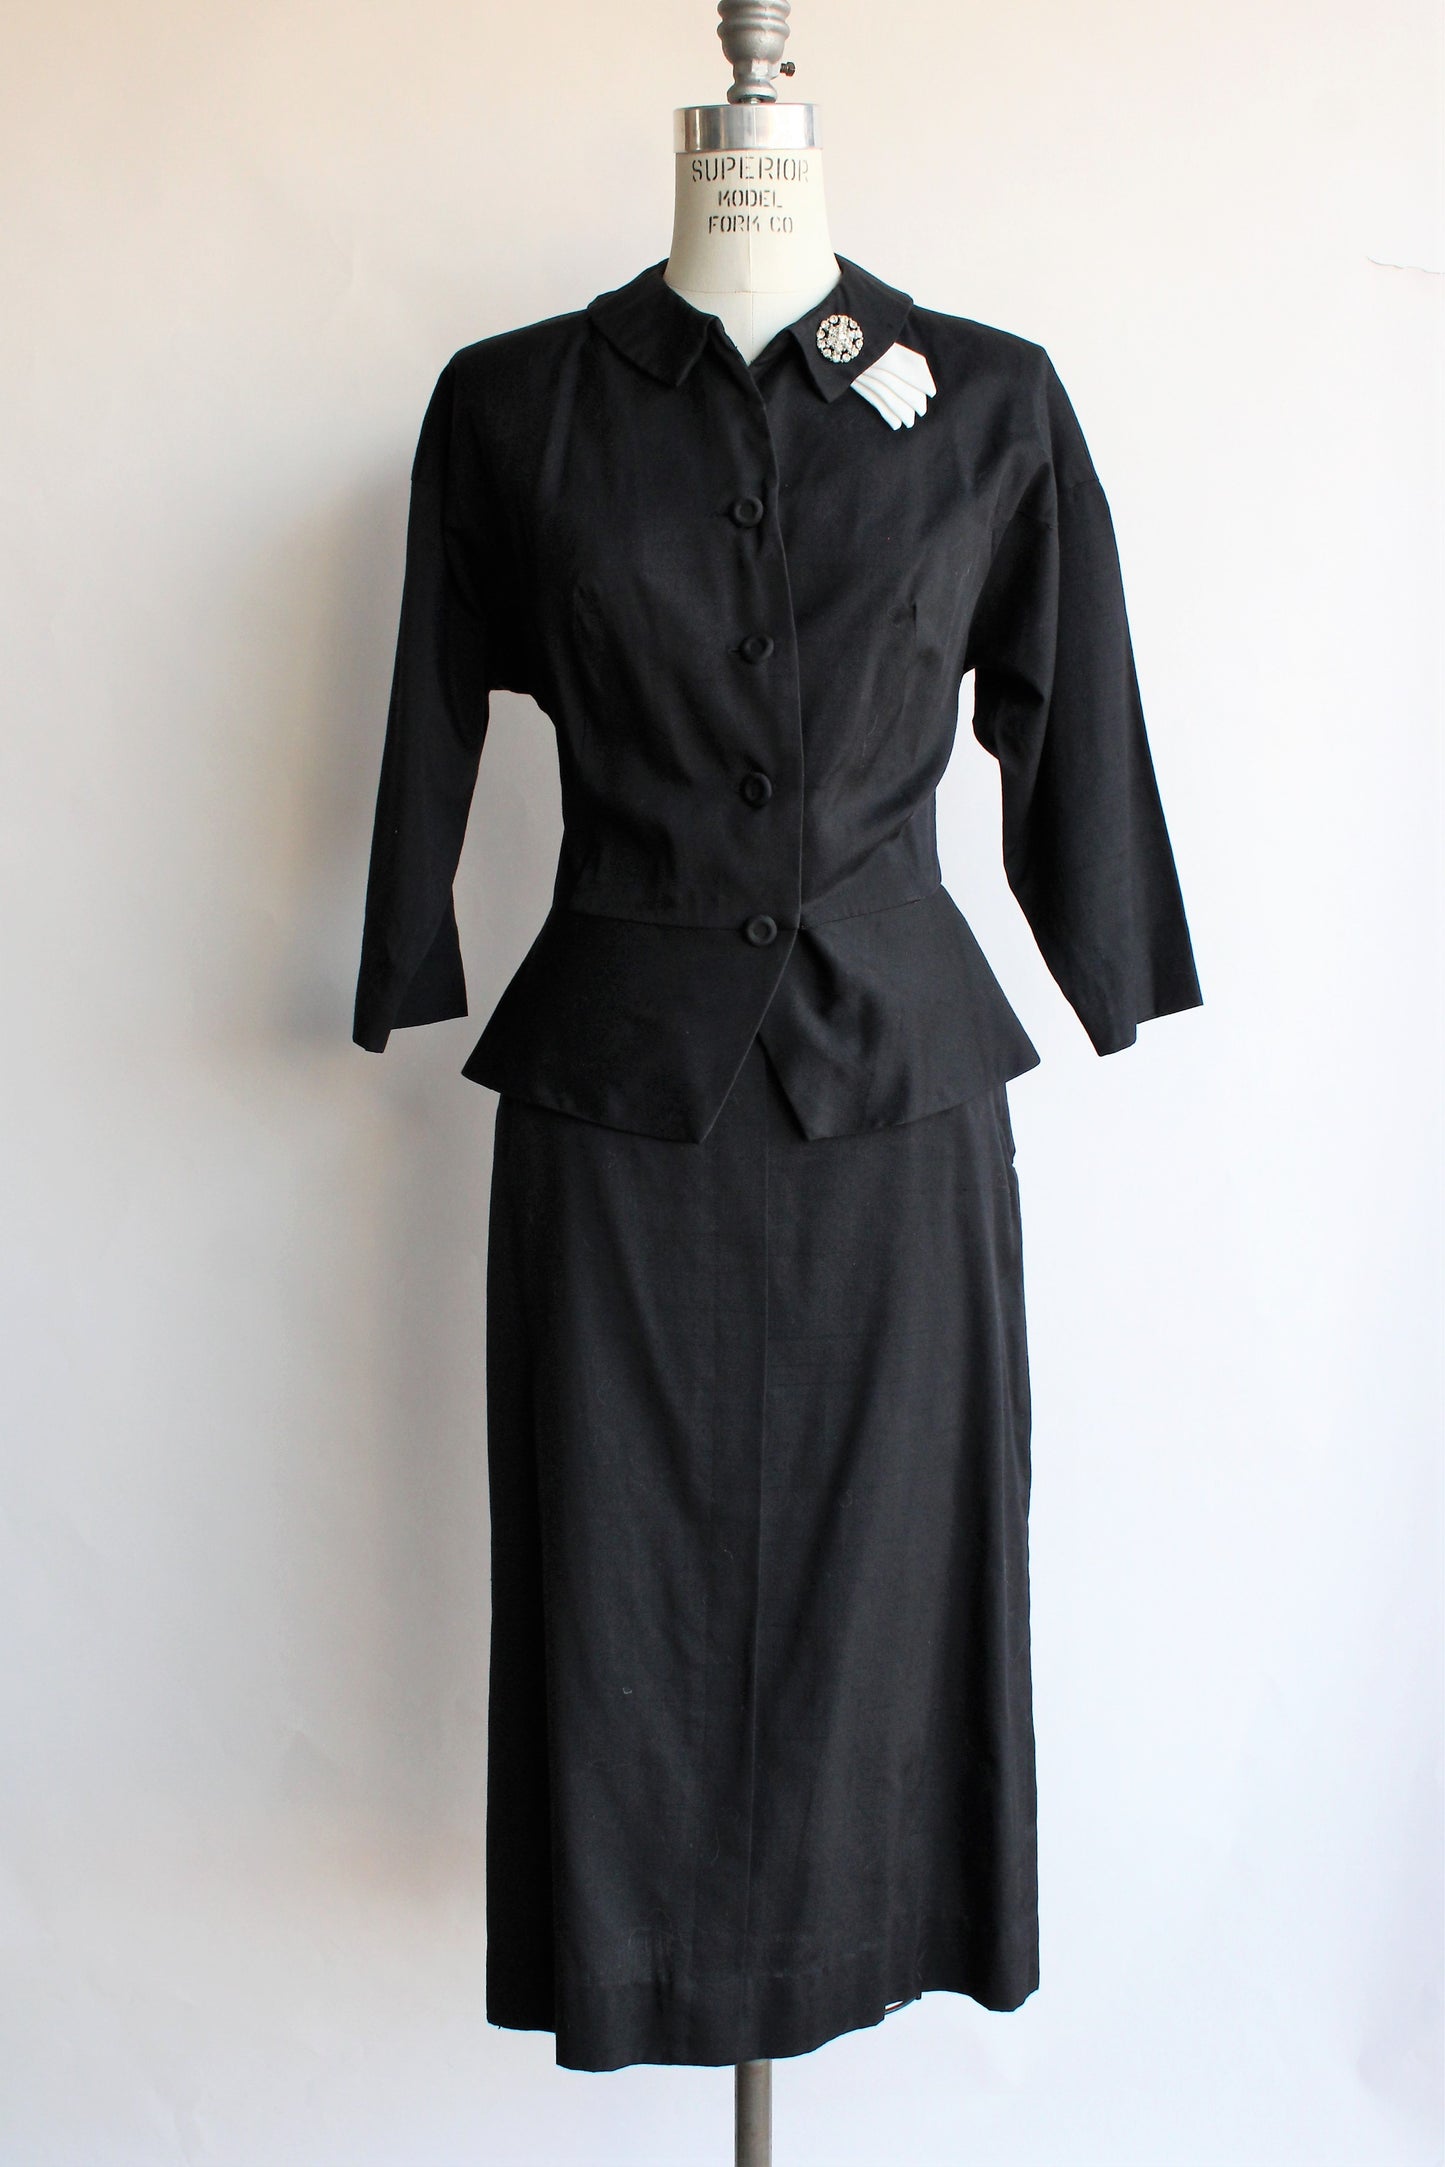 Vintage 1950s Two Piece Black Cotton Suit By Wilshire of Boston